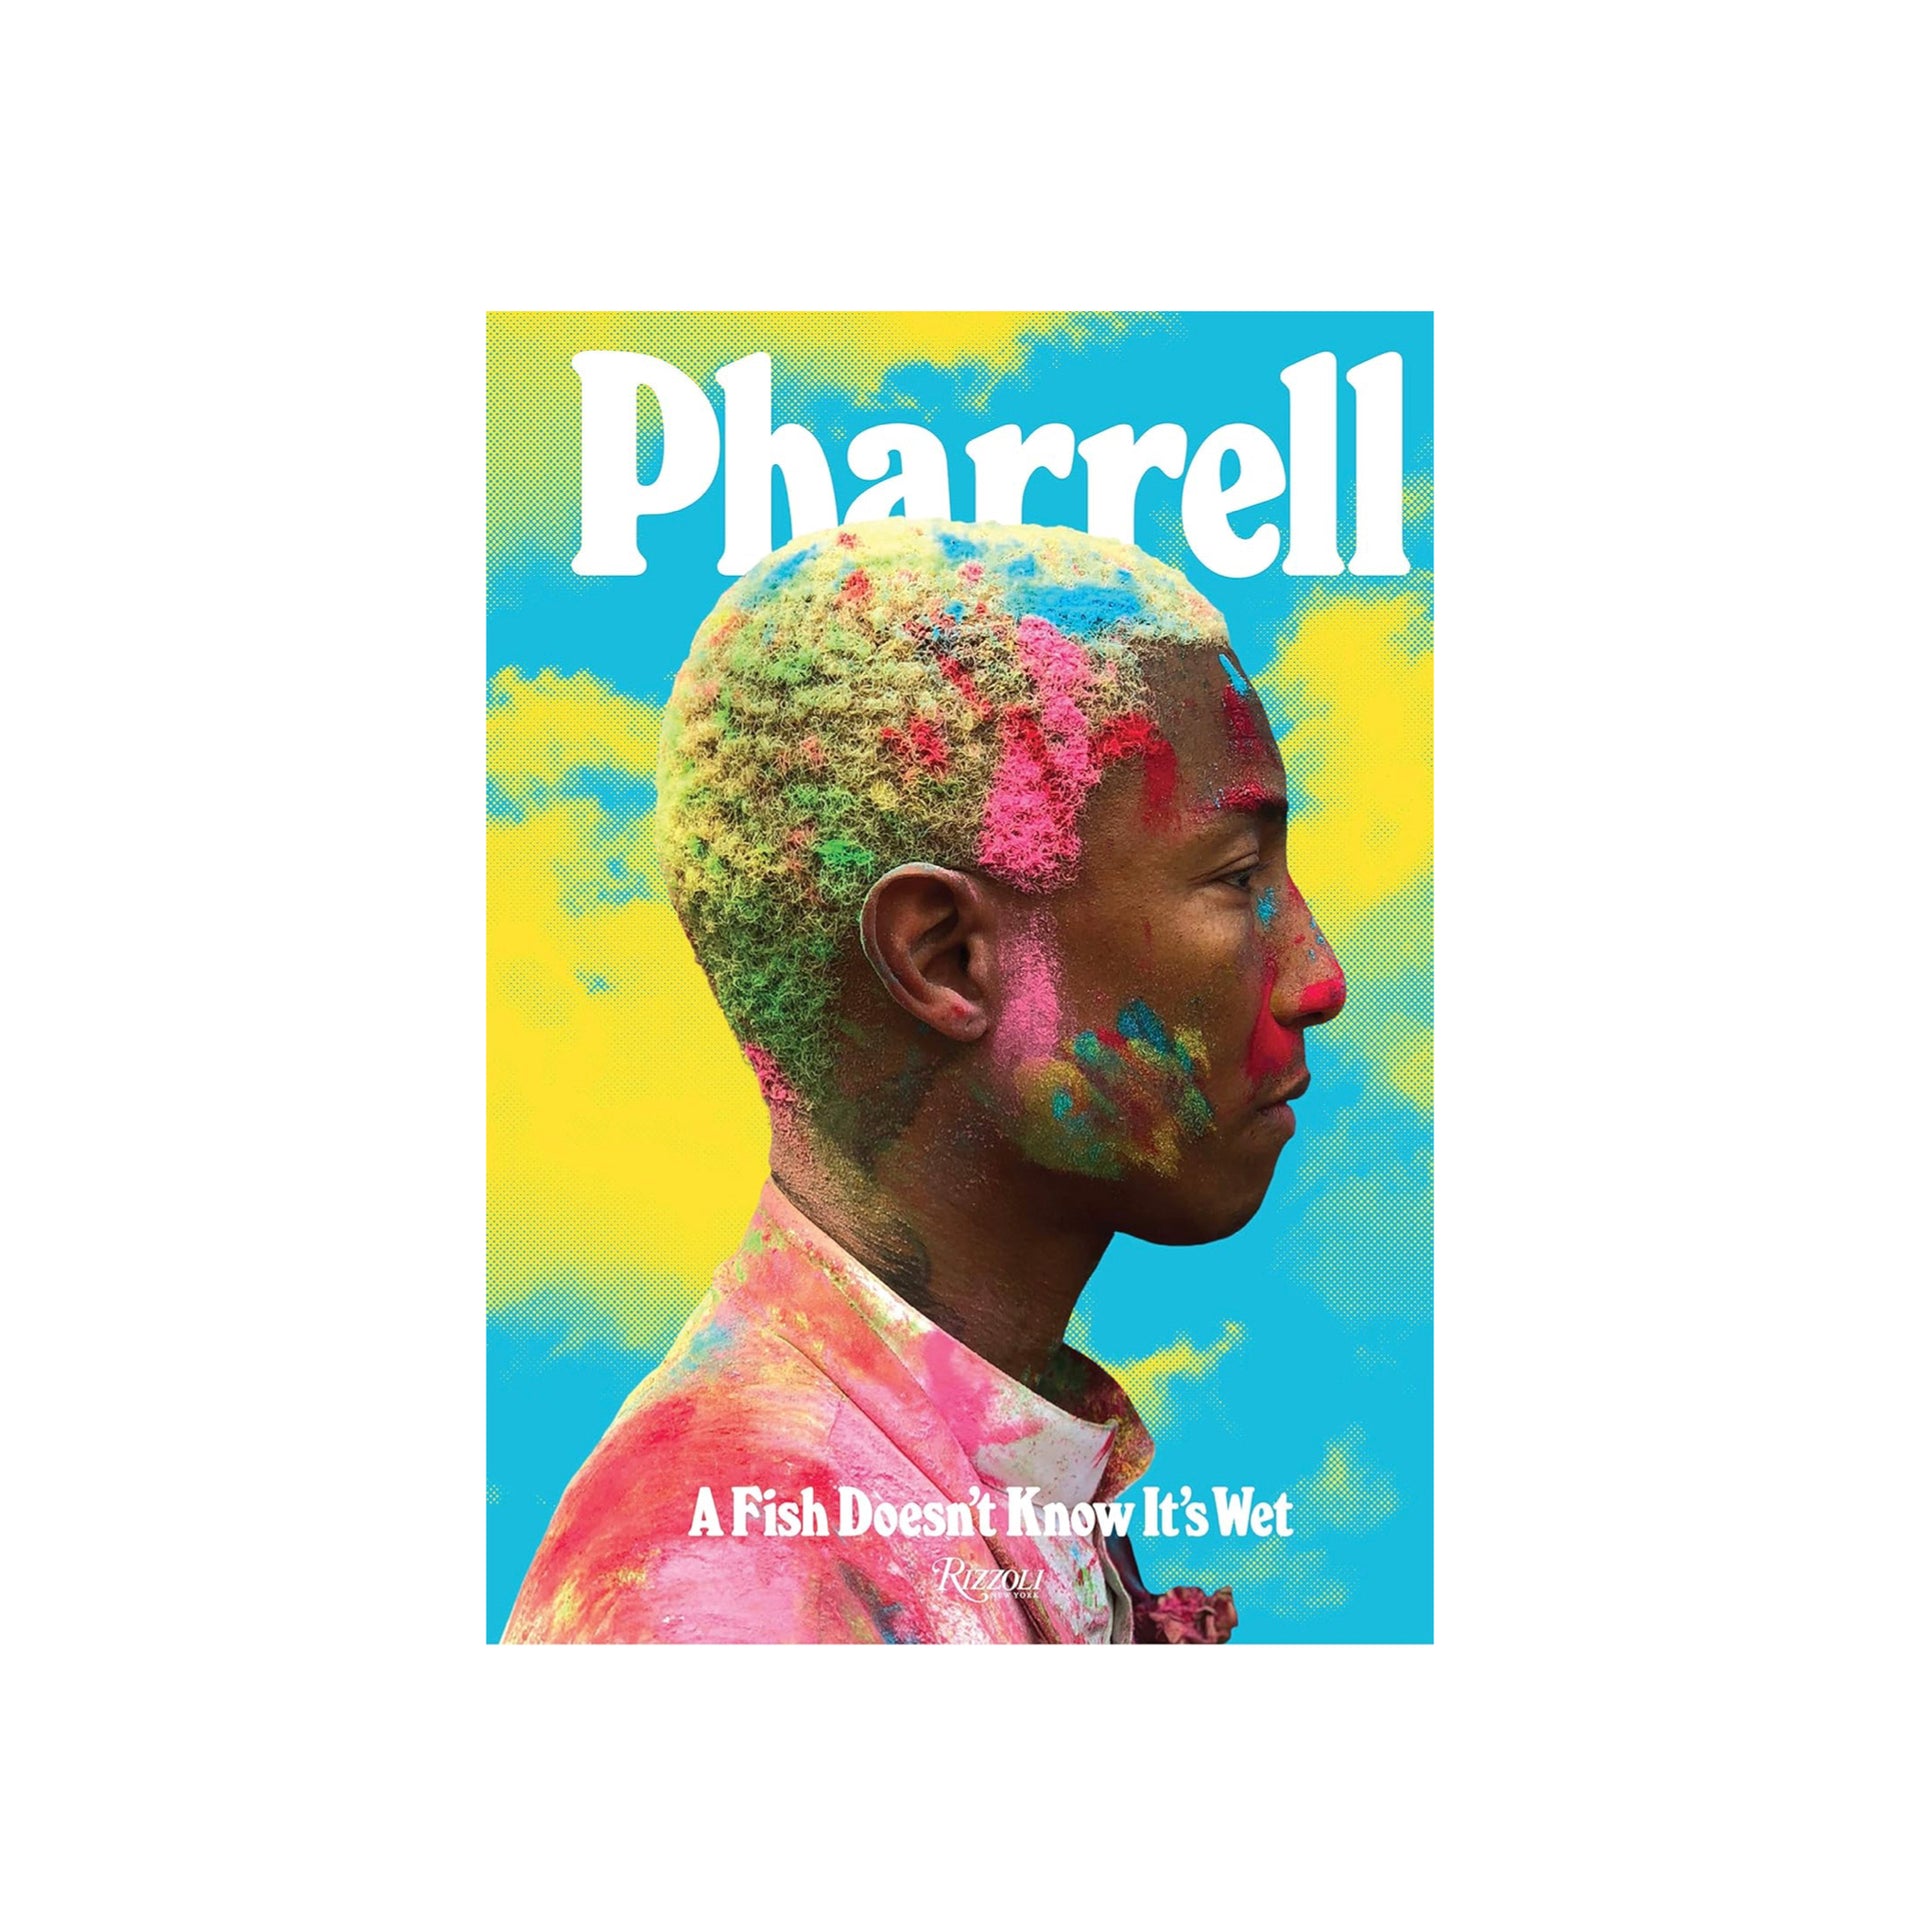 Pharrell – A Fish Doesn’t Know It’s Wet